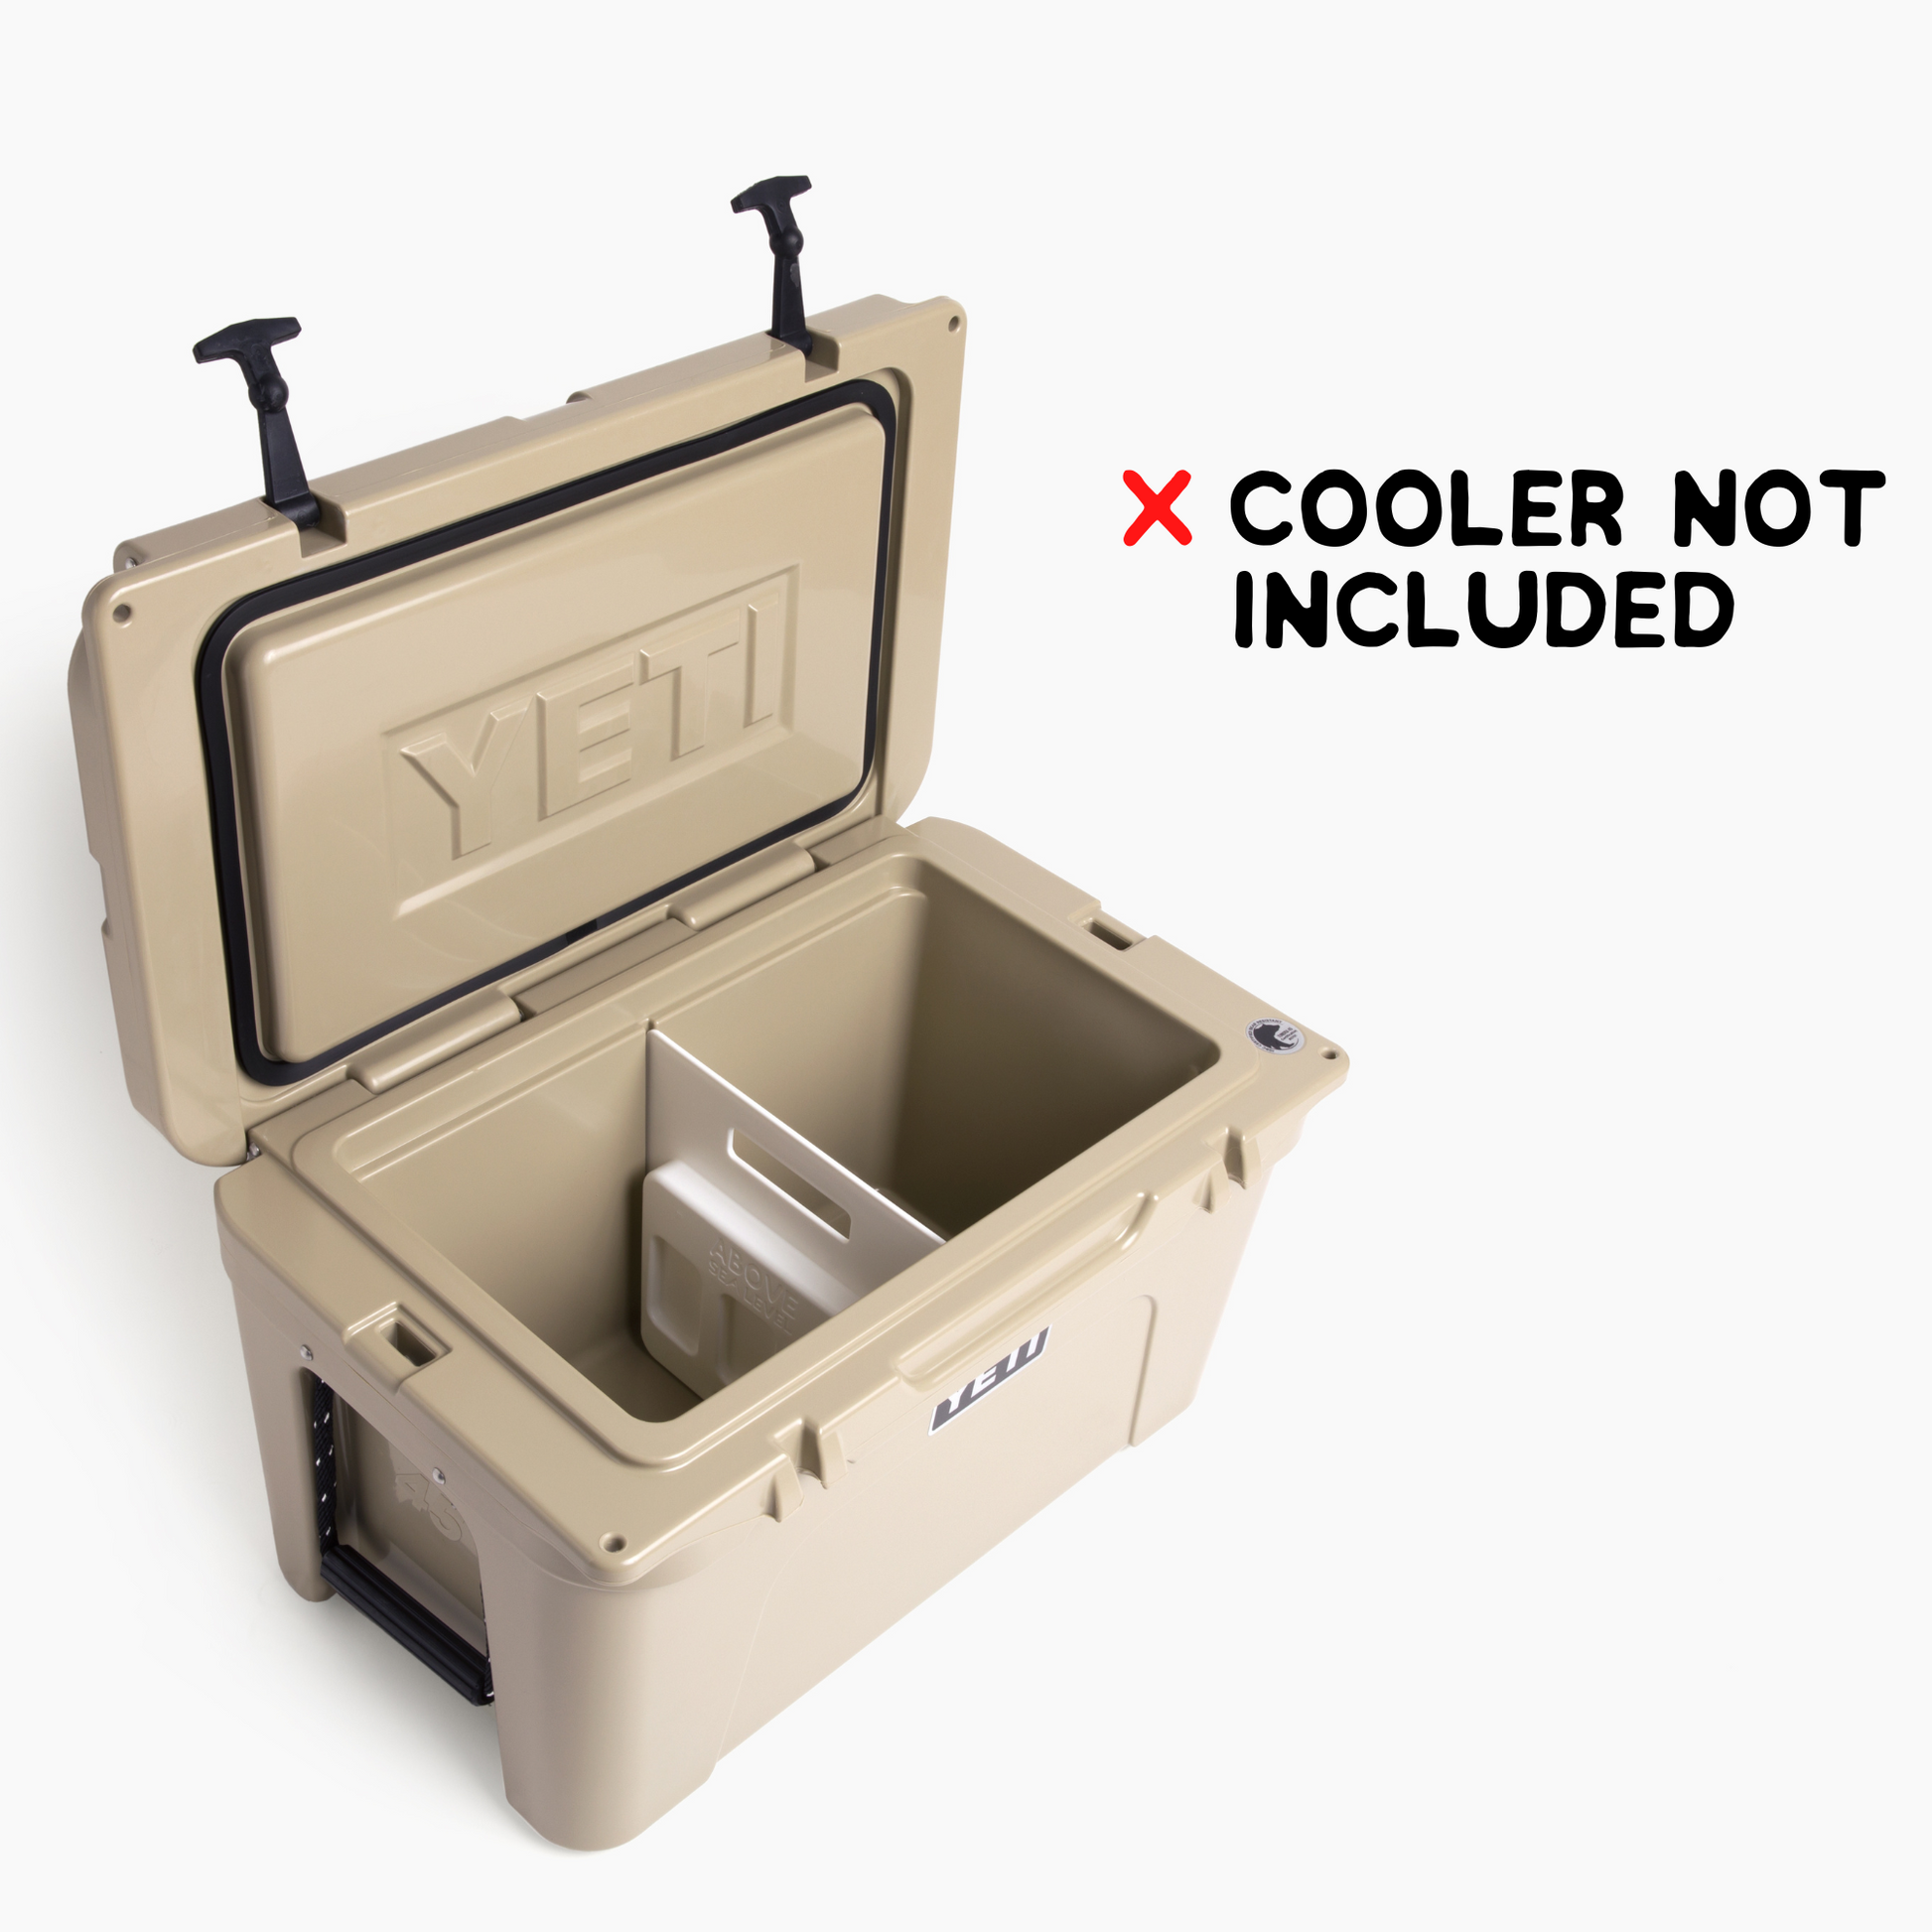 ChillWall Ice Pack Cooler Divider for Yeti Tundra Coolers Fits Yeti Tundra 35 / 45